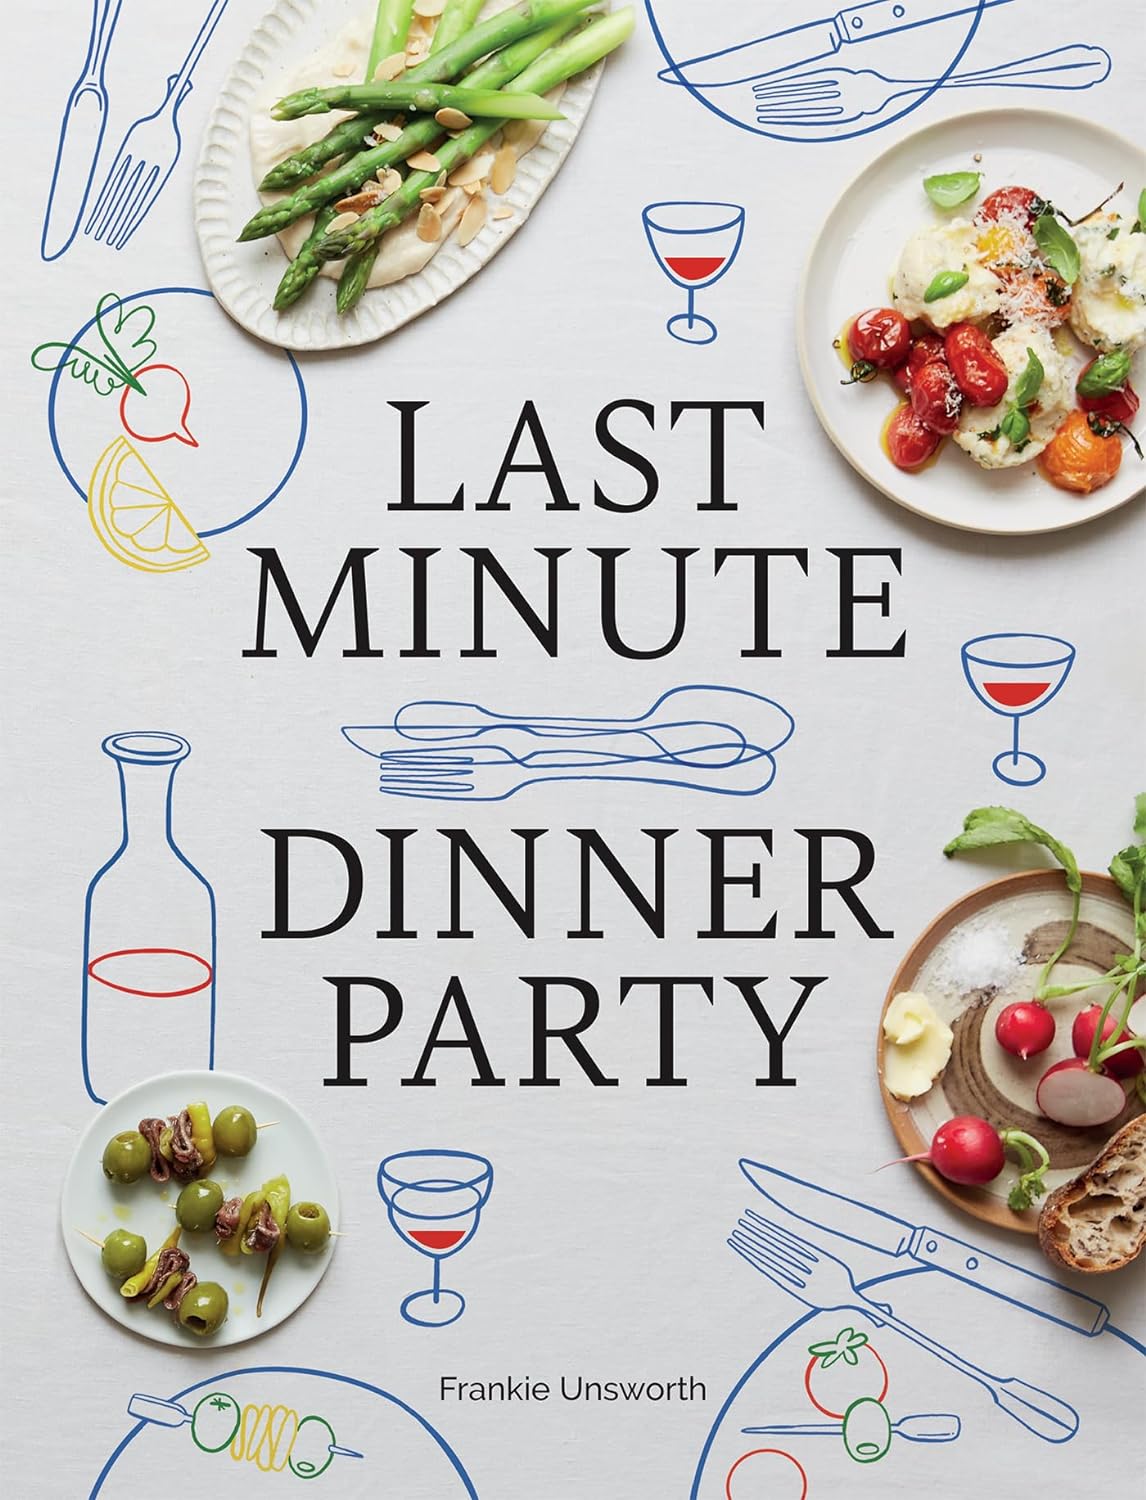 Last Minute Dinner Party: Over 120 Inspiring Dishes to Feed Family and Friends At A Moment's Notice (Frankie Unsworth)